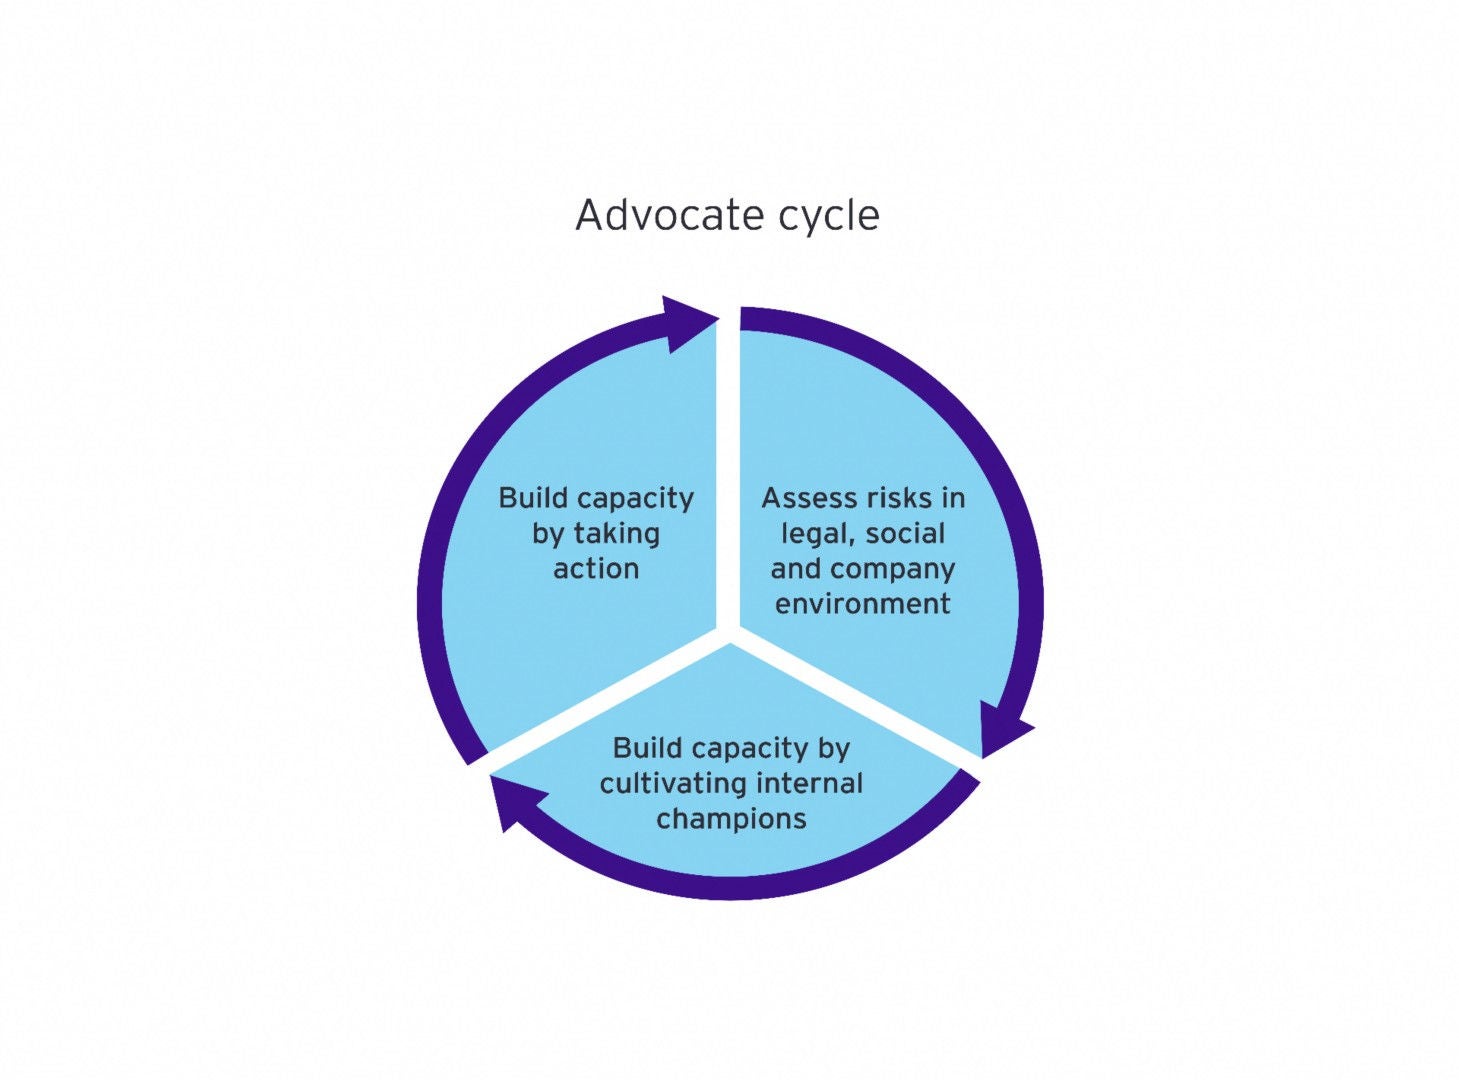 Advoctate cycle graphic